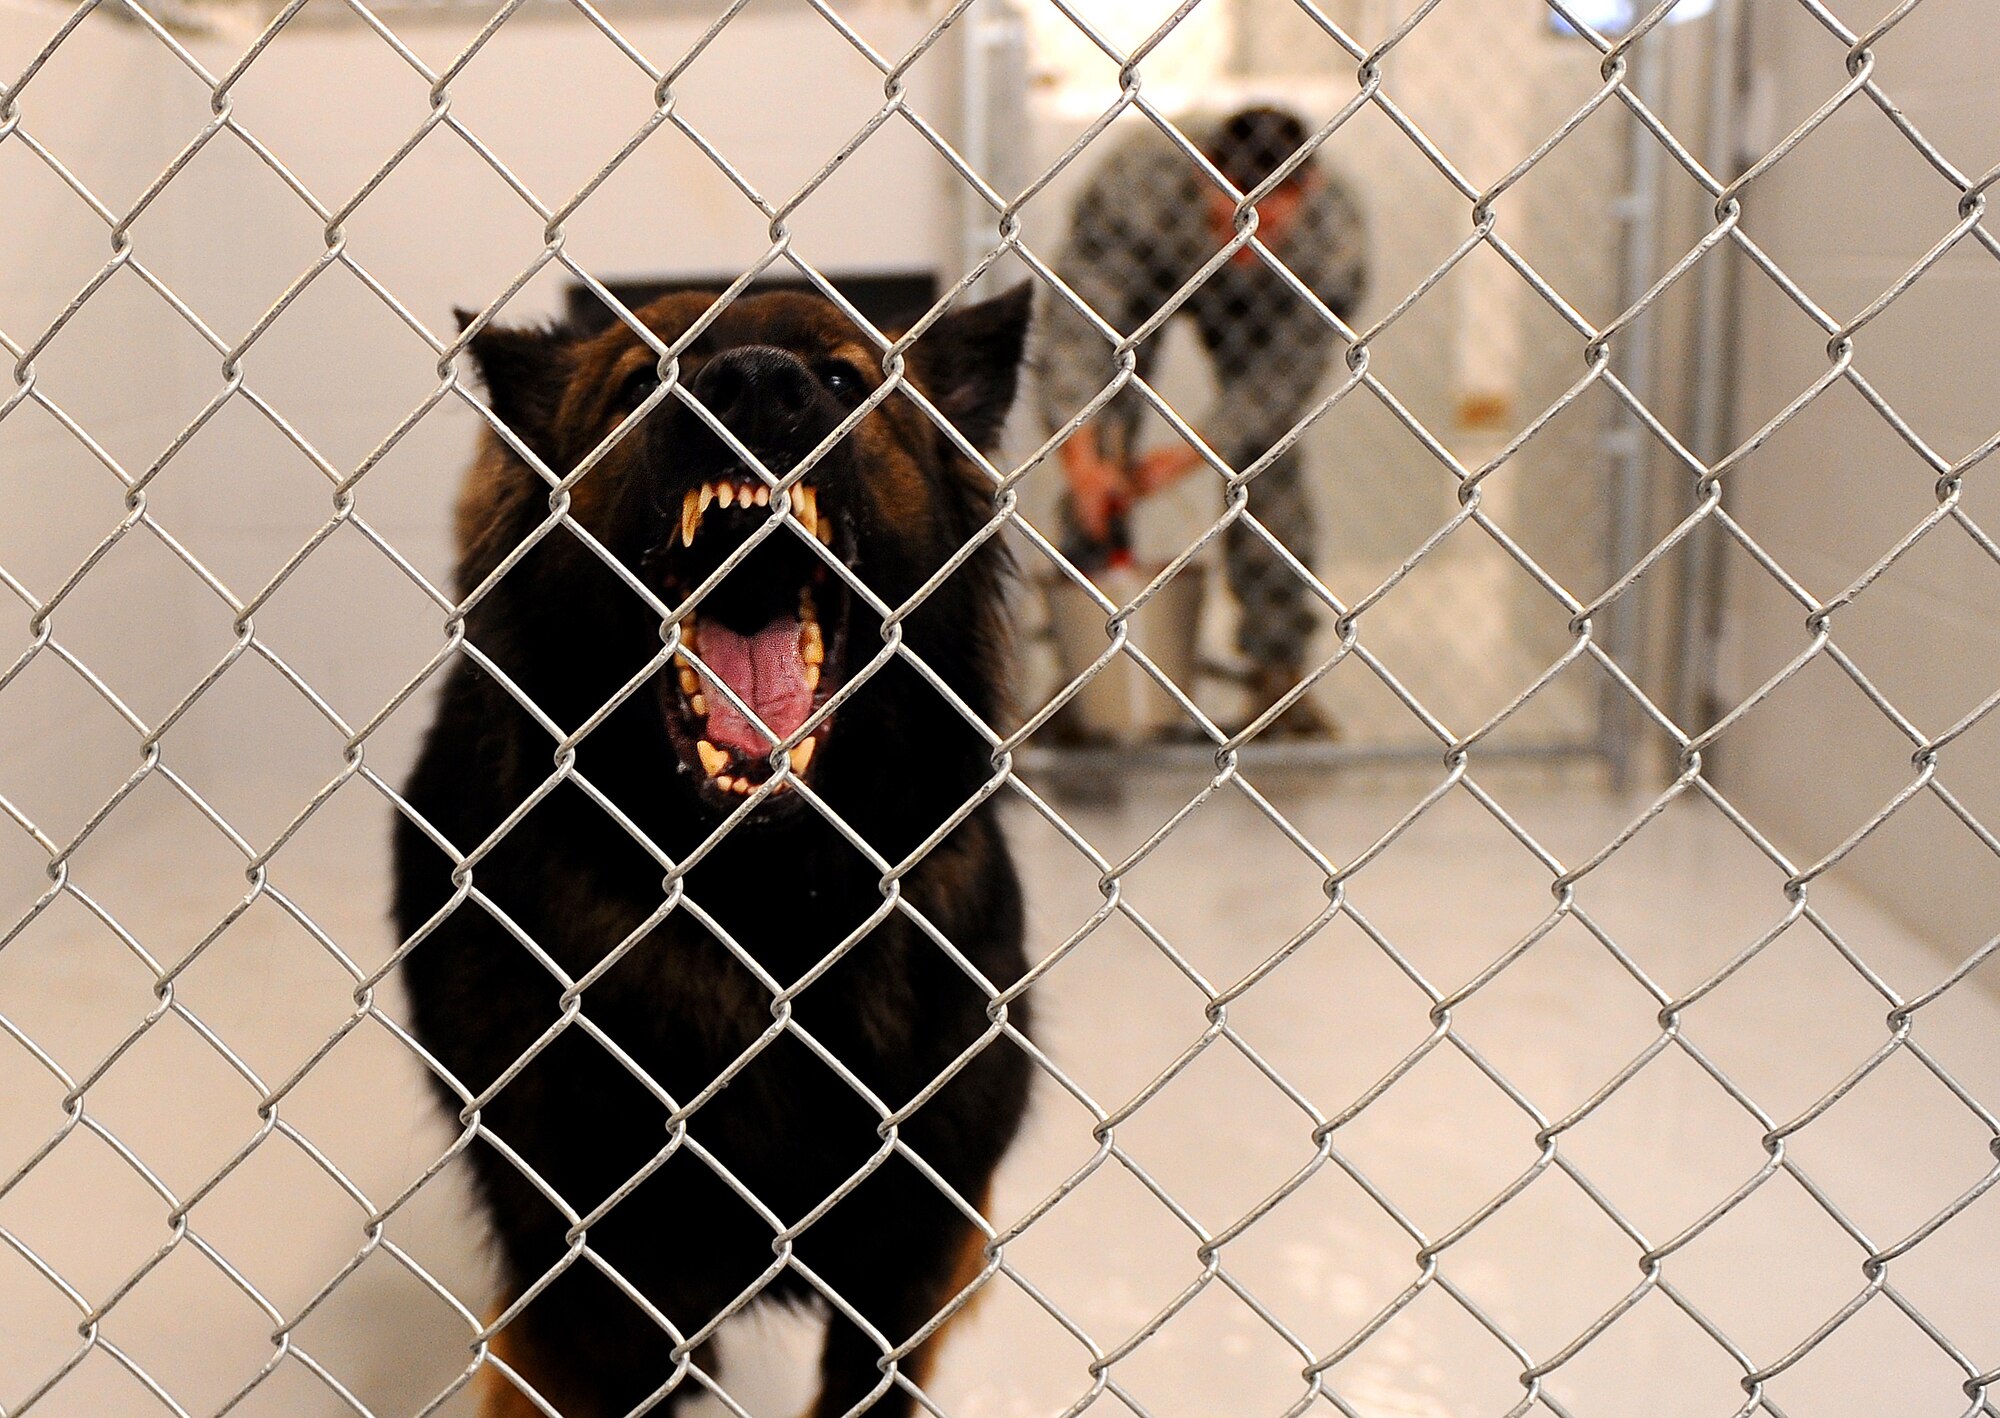 OFFUTT AIR FORCE BASE, Neb. - Dasty, a Belgian Tervuren, barks inside his kennel as his handler Staff Sgt. Joel Therrien replaces his water inside the newly remodeled Offutt kennel Dec. 1.  The dogs may sometimes appear like just a household pet at times. However, these extensively trained dogs are ready to perform a wide array of functions at a moments notice.   U.S. Air Force Photo by Josh Plueger (Released)